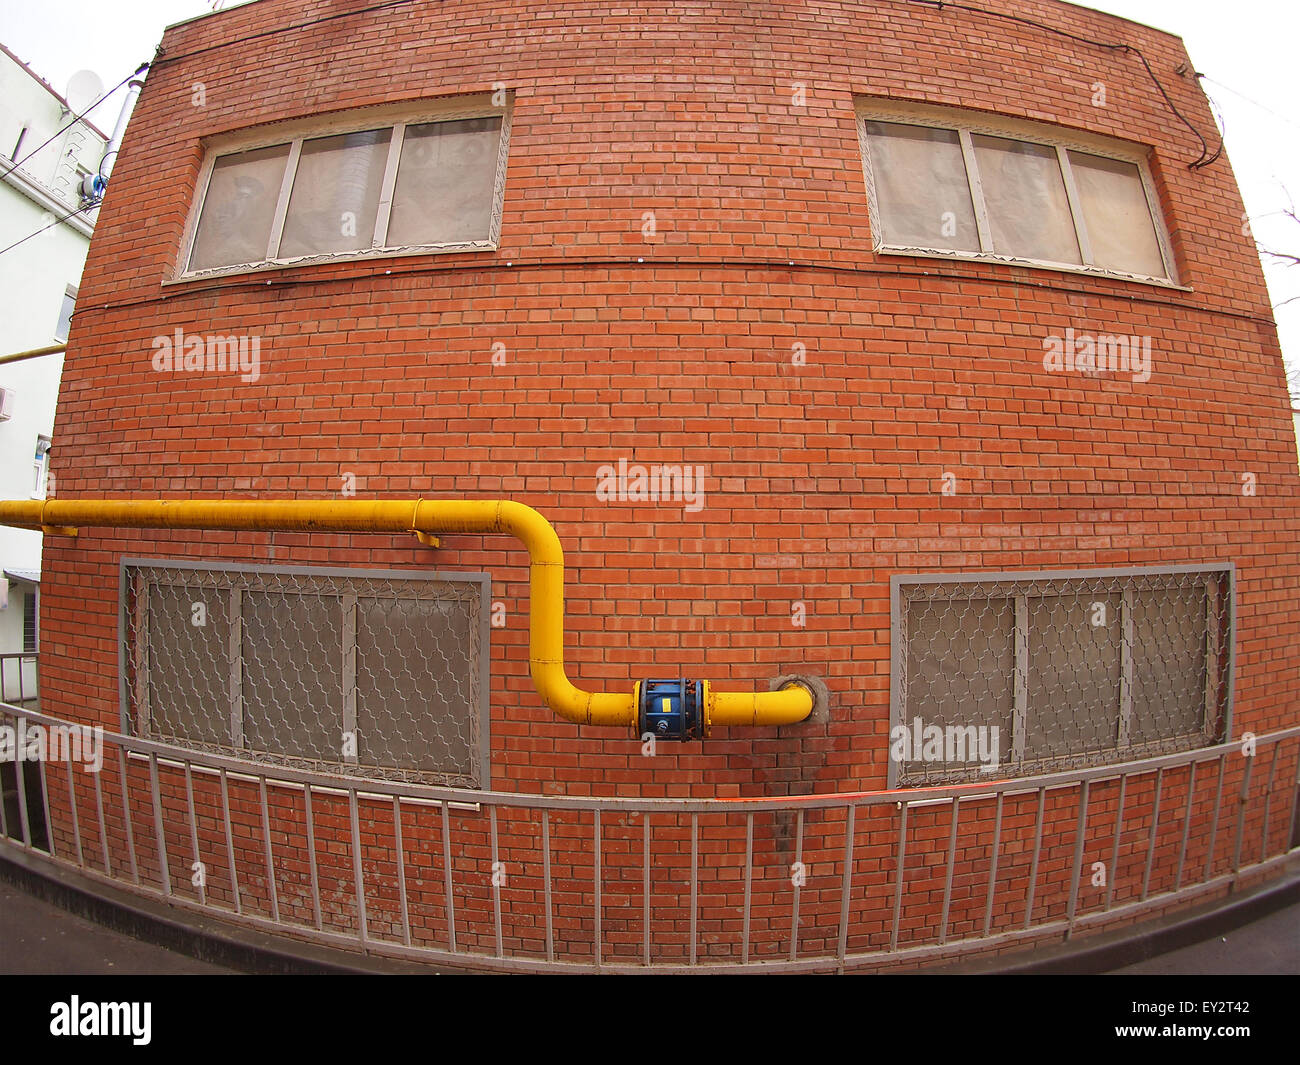 Wall of a building with a yellow gas pipe and windows with wide angle fisheye view Stock Photo